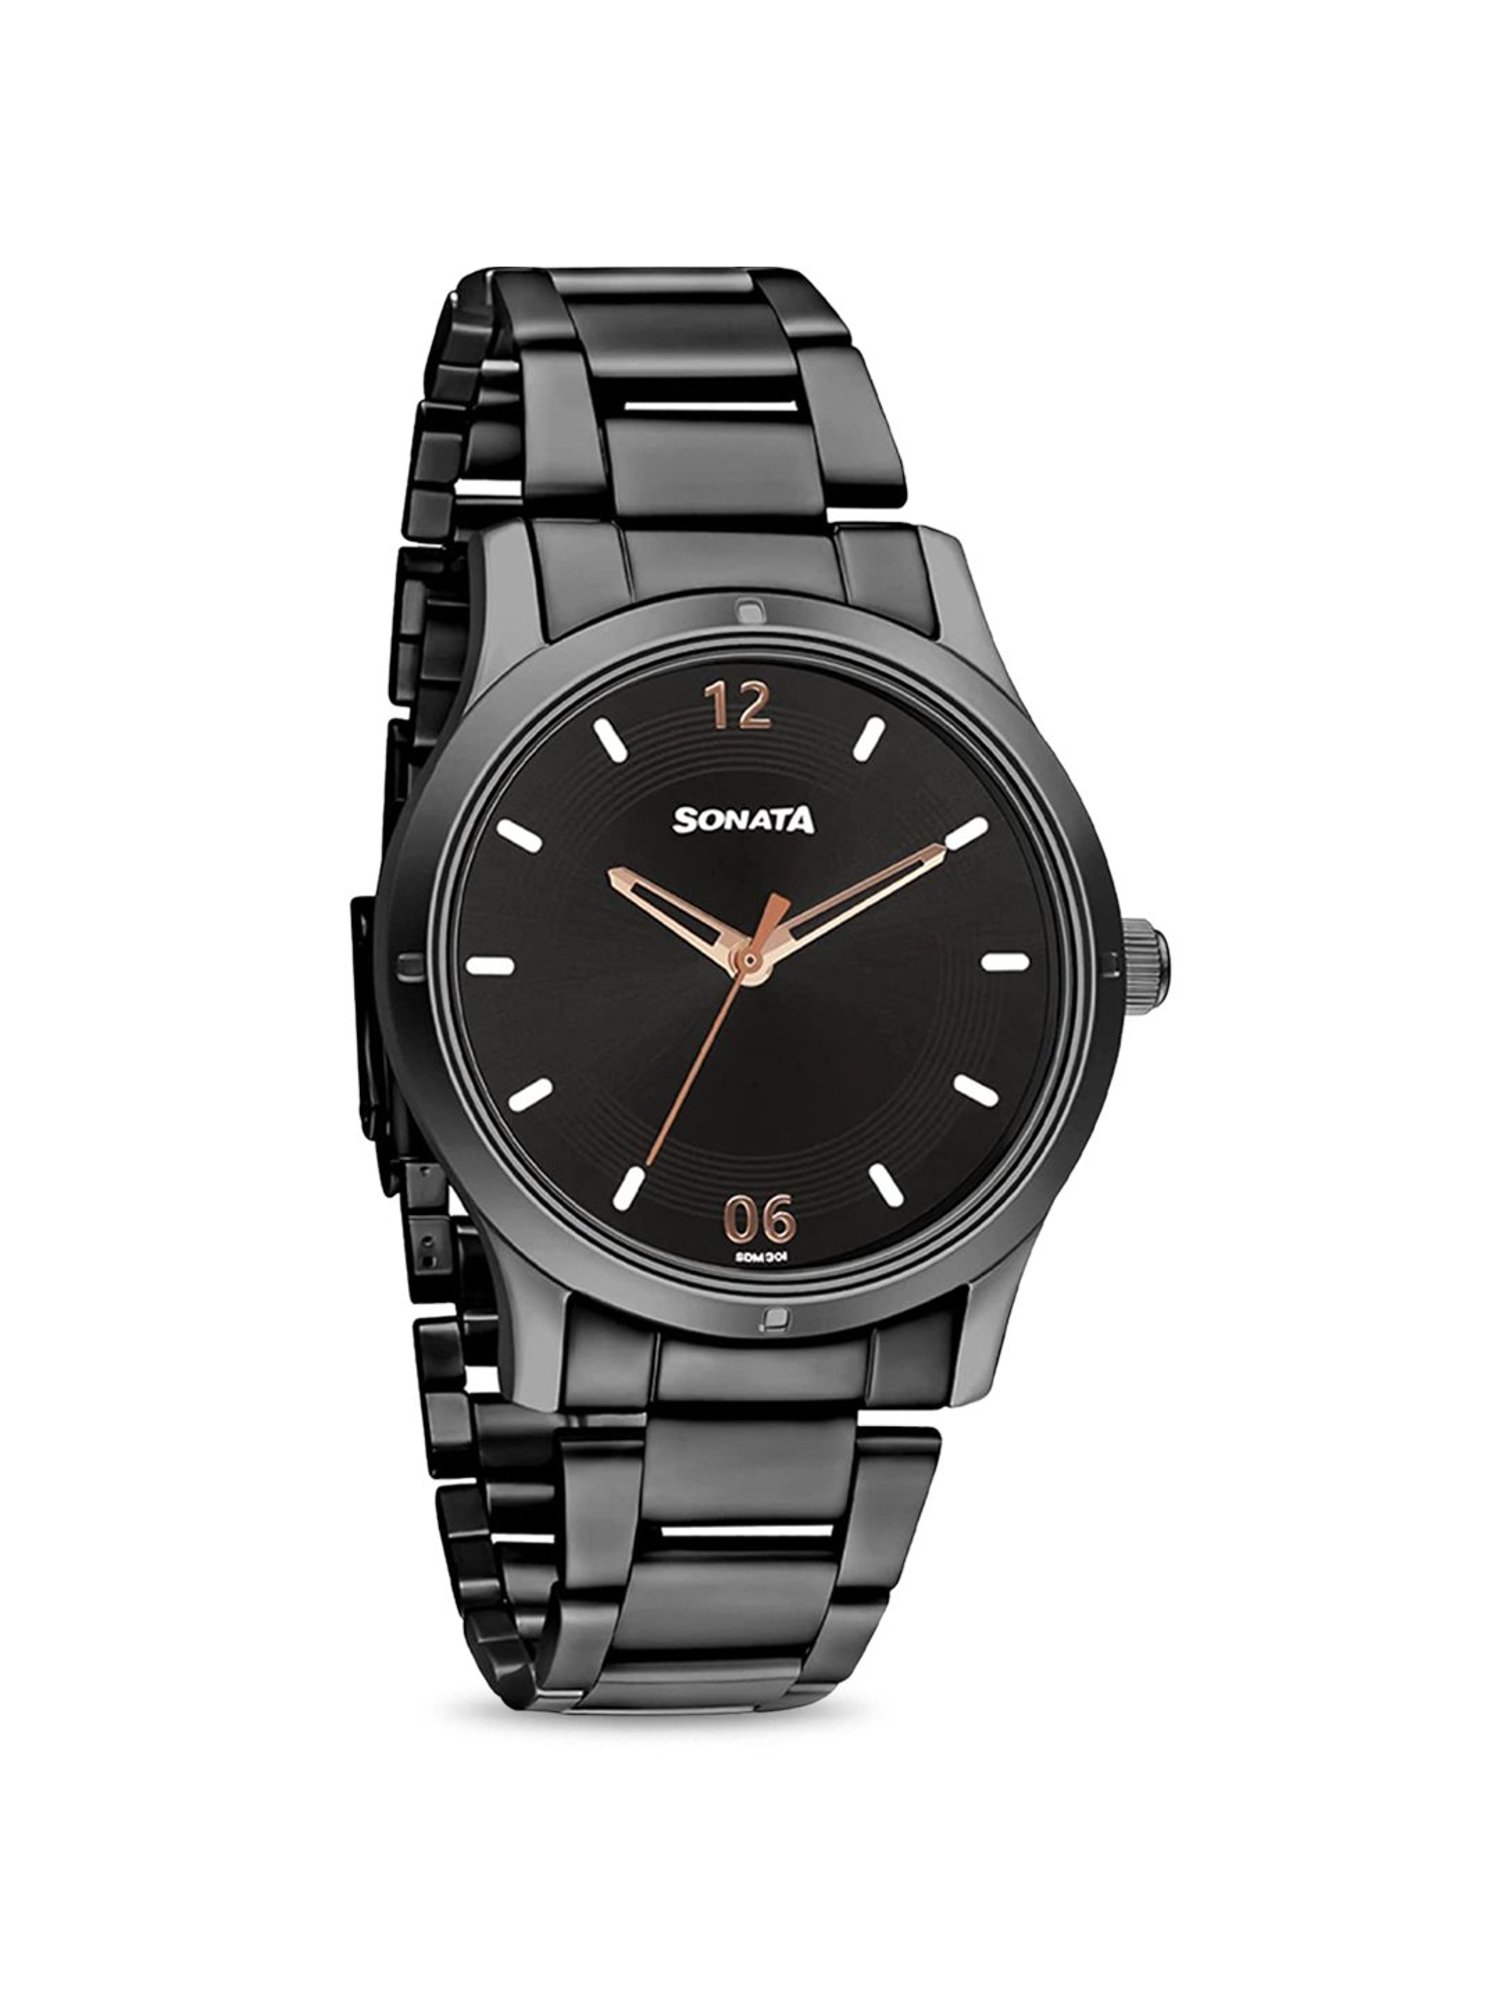 Buy Chain Watches For Men Online at Best Prices in India at Tata CLiQ